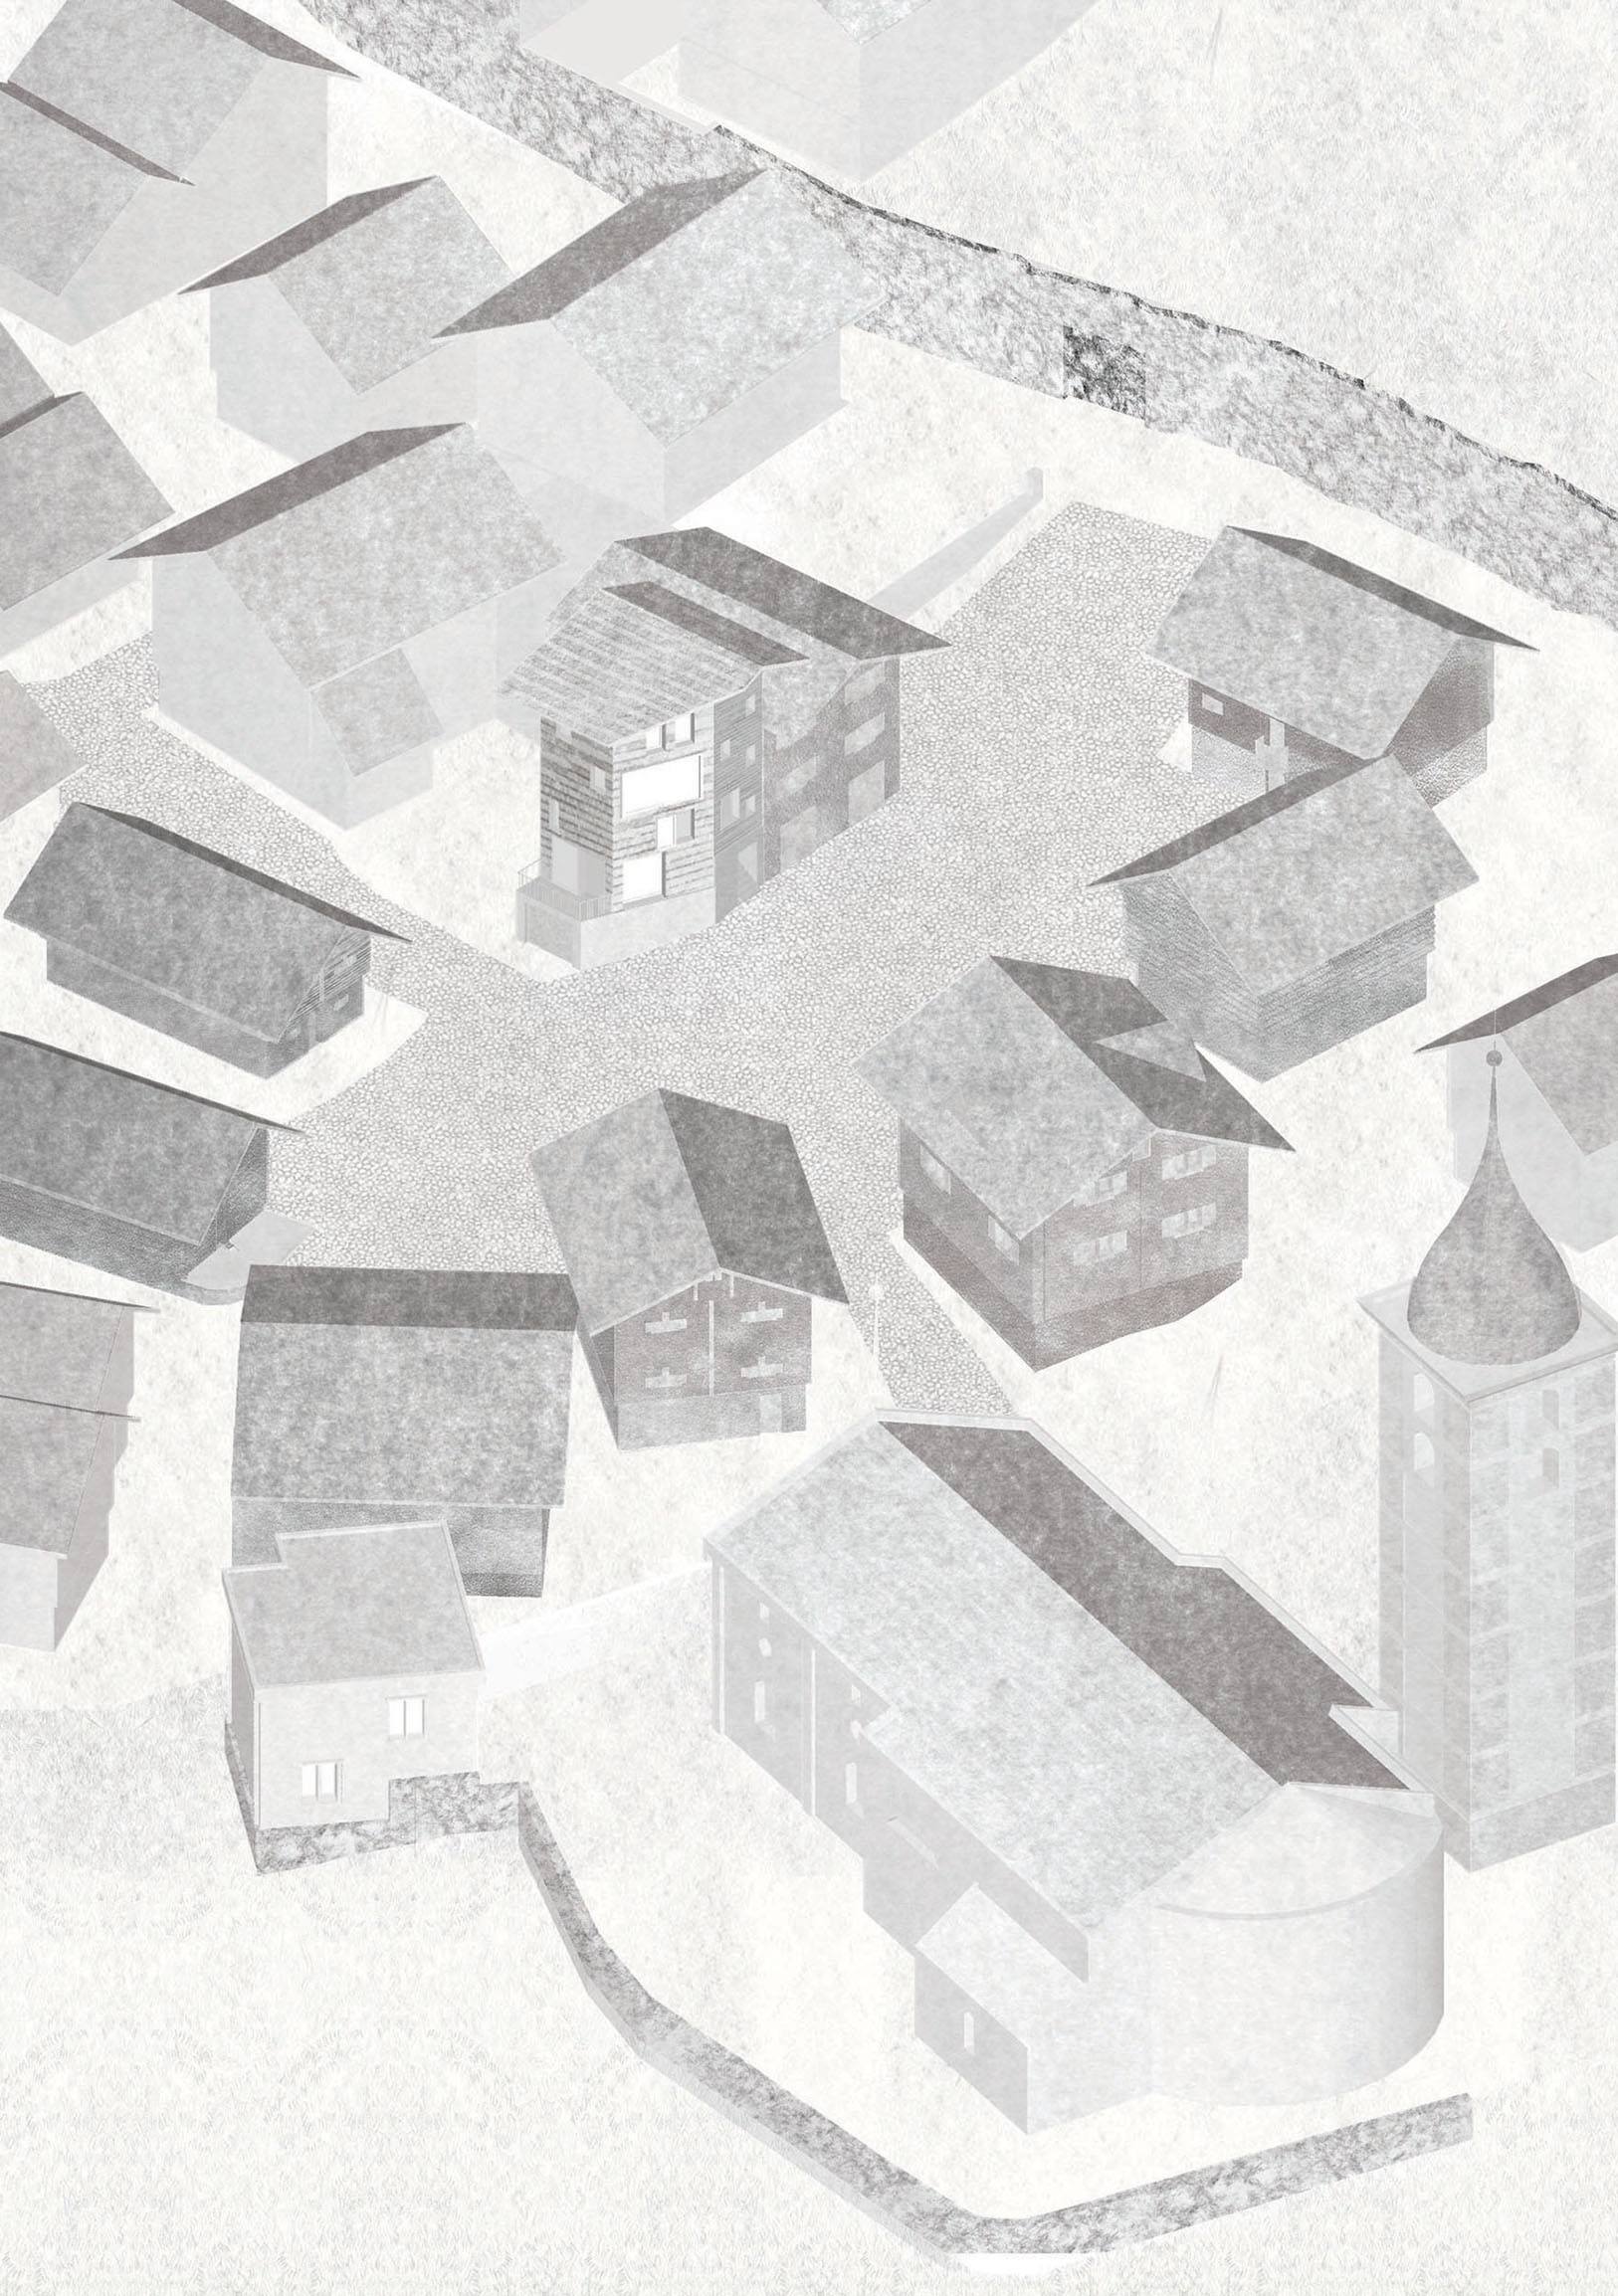 Textured axonometric of the proposal in the context of the village.